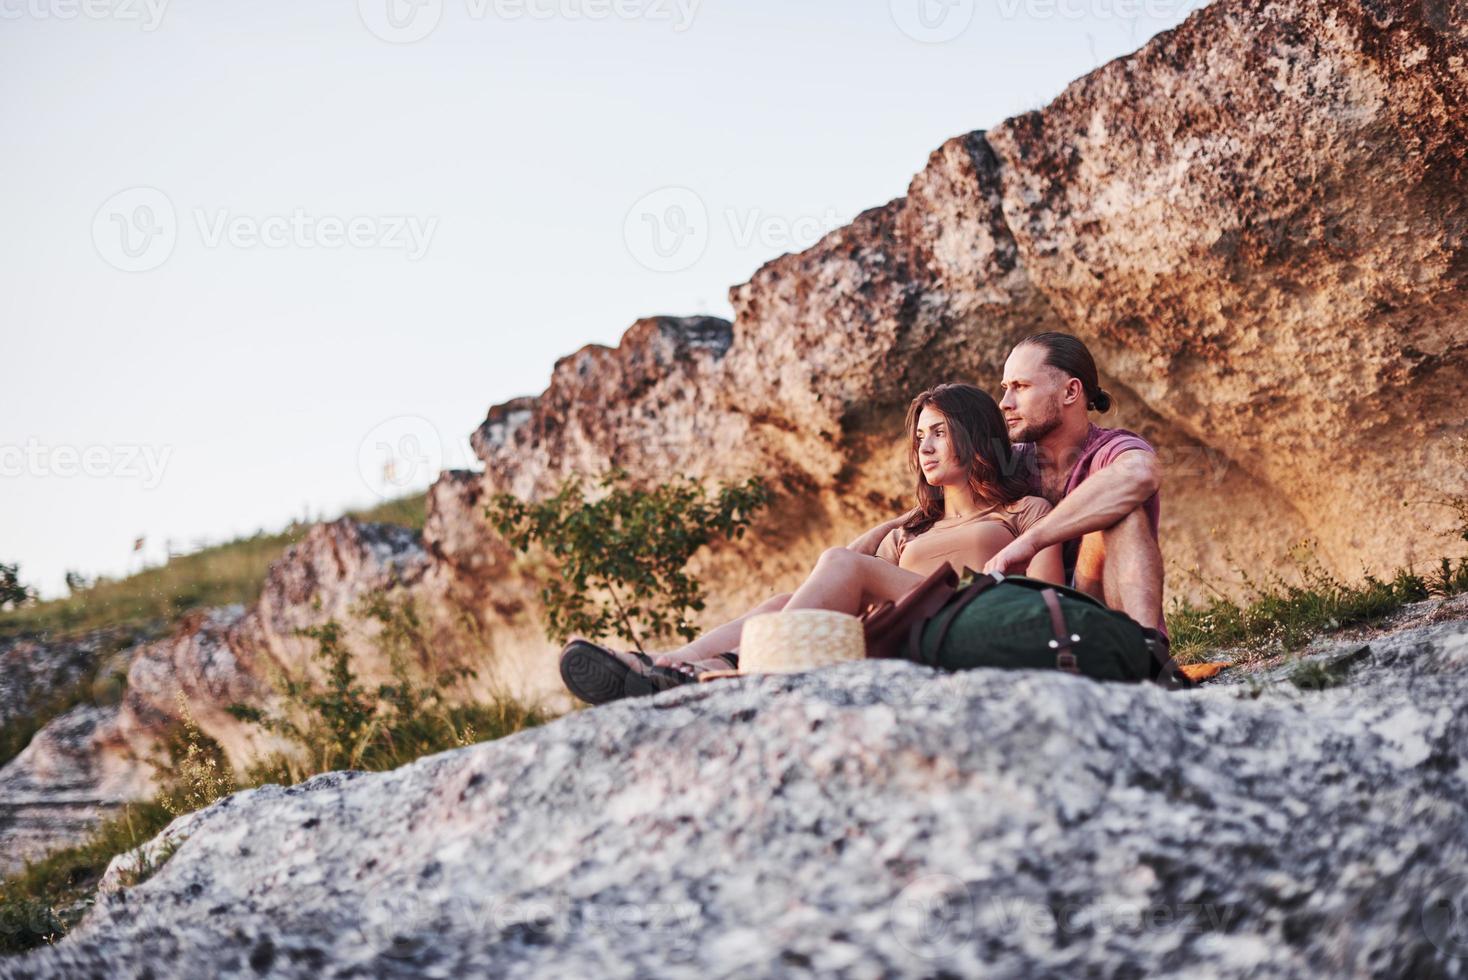 Dreaming mood. Two person sitting on the rock and watching gorgeous nature photo